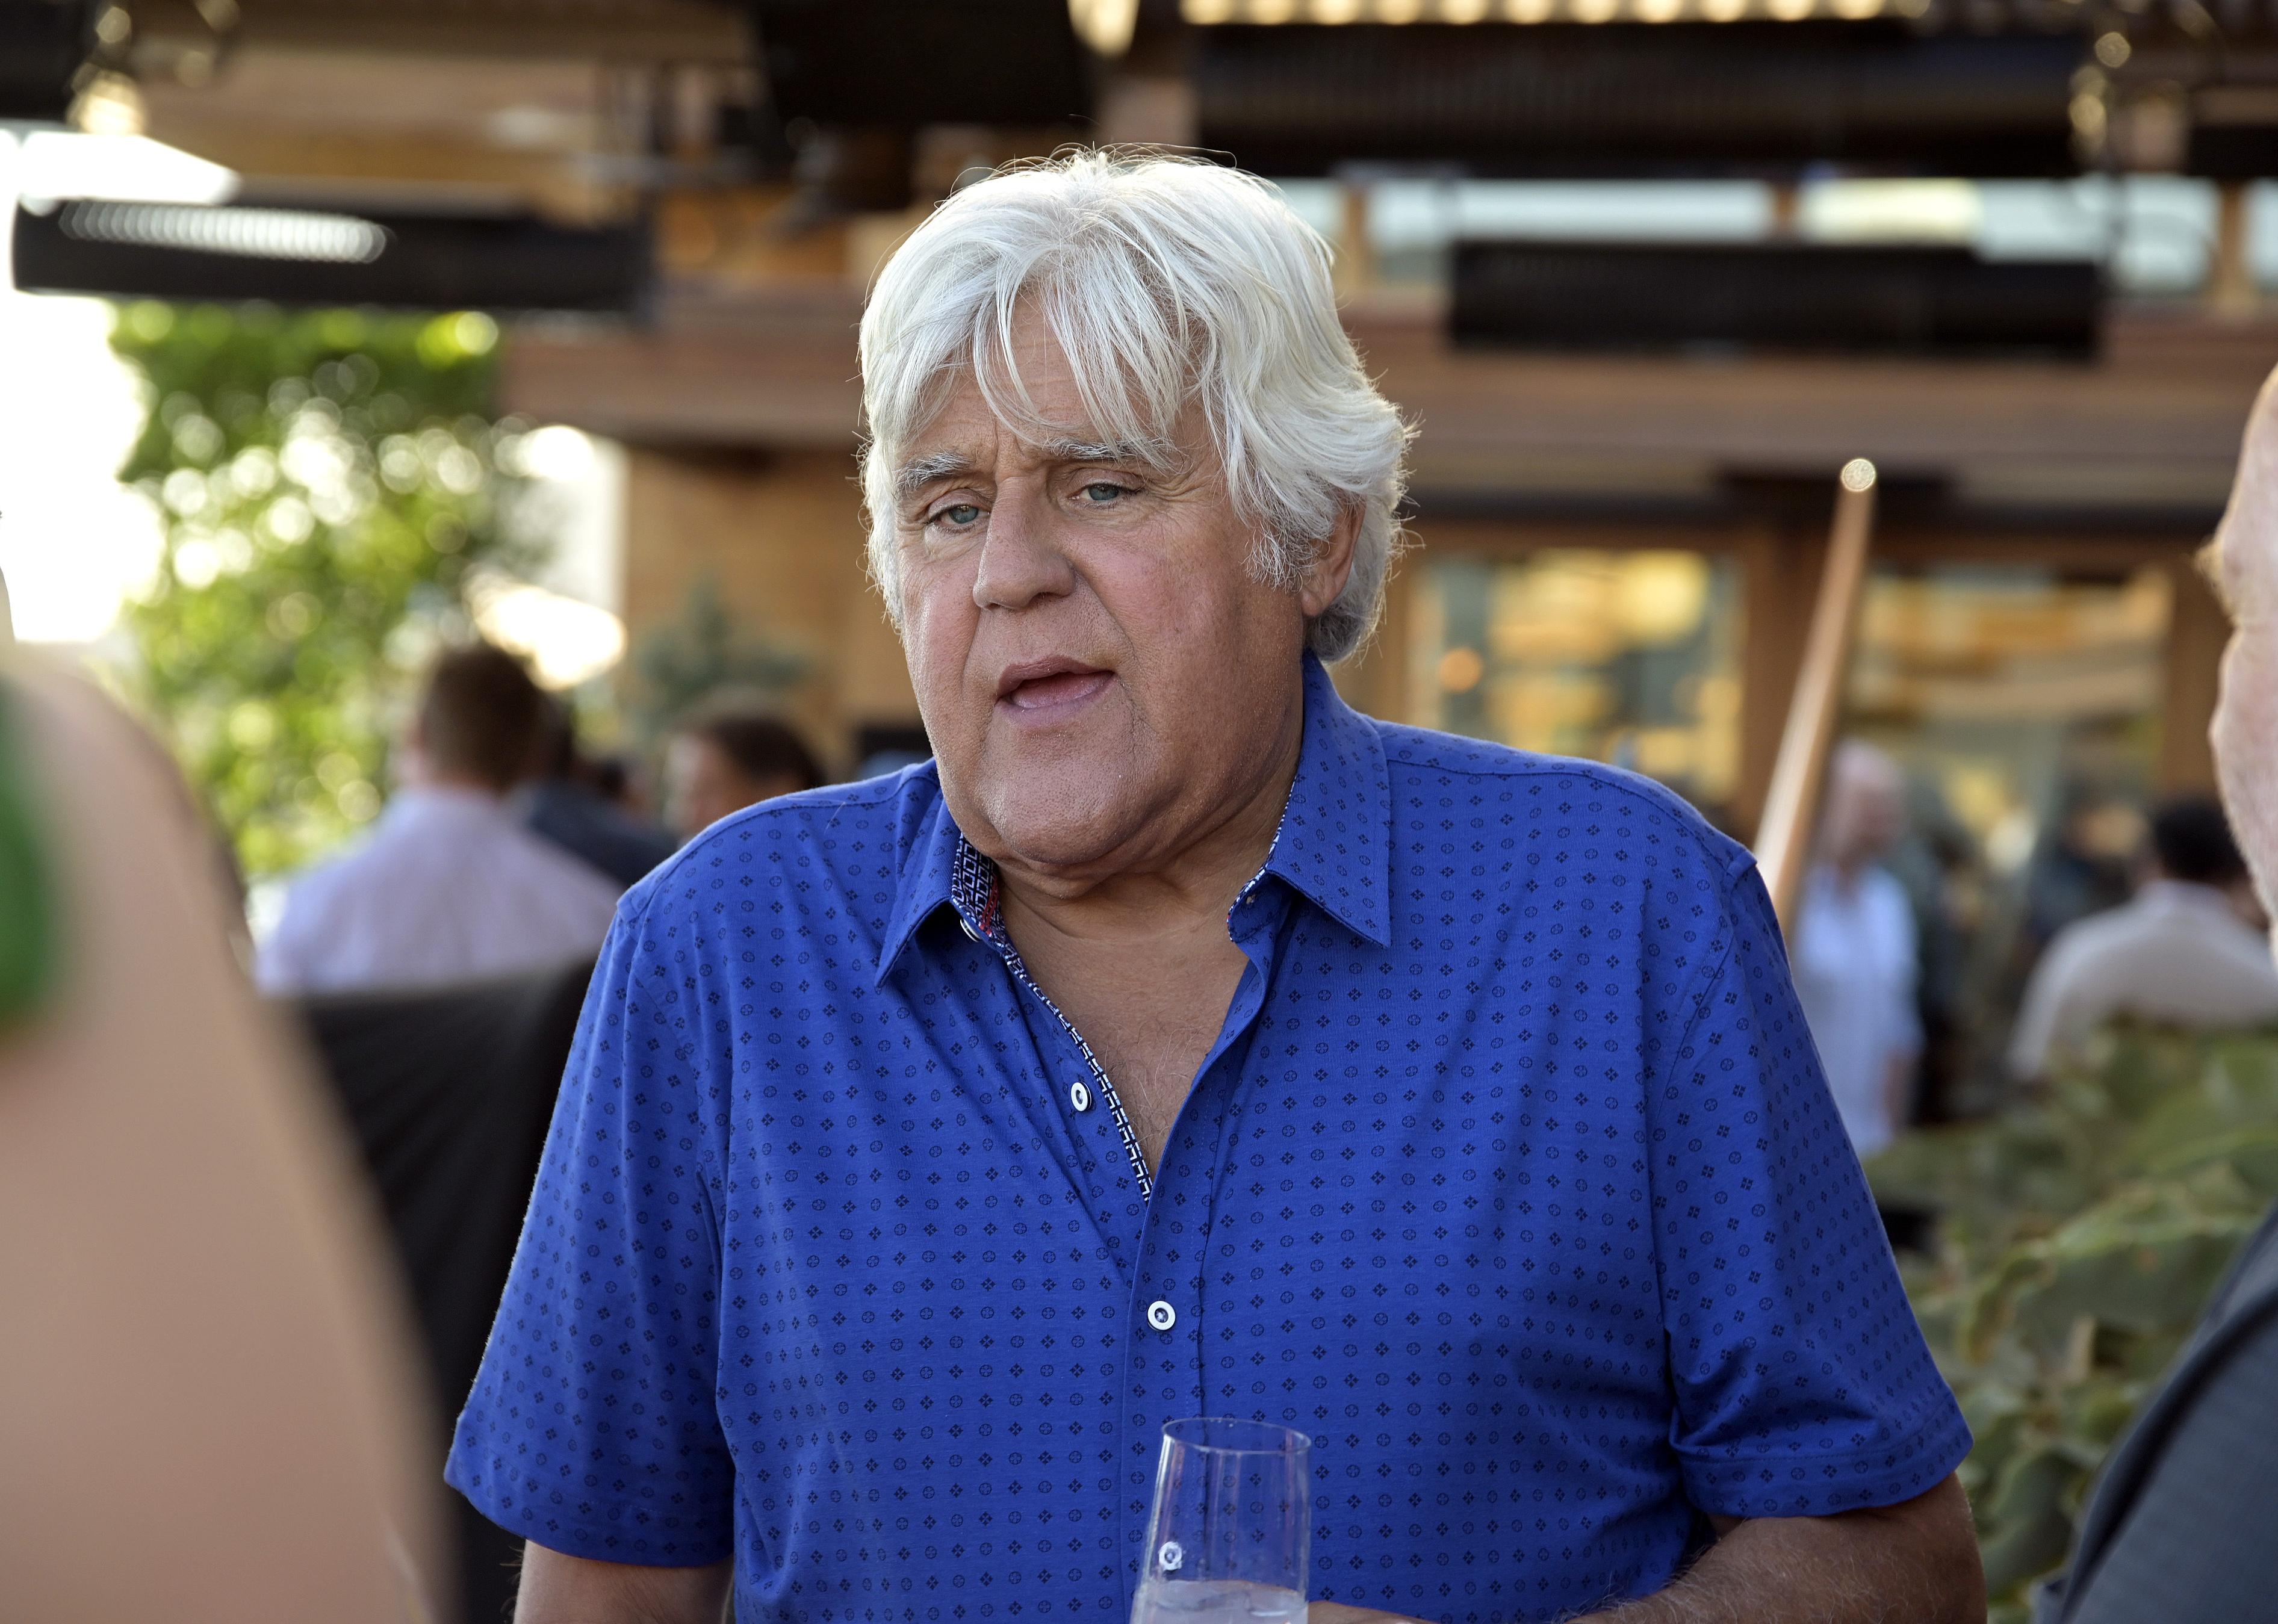 Jay Leno attends the private unveiling of the Meyers Manx electric automobile at Little Beach House Malibu.